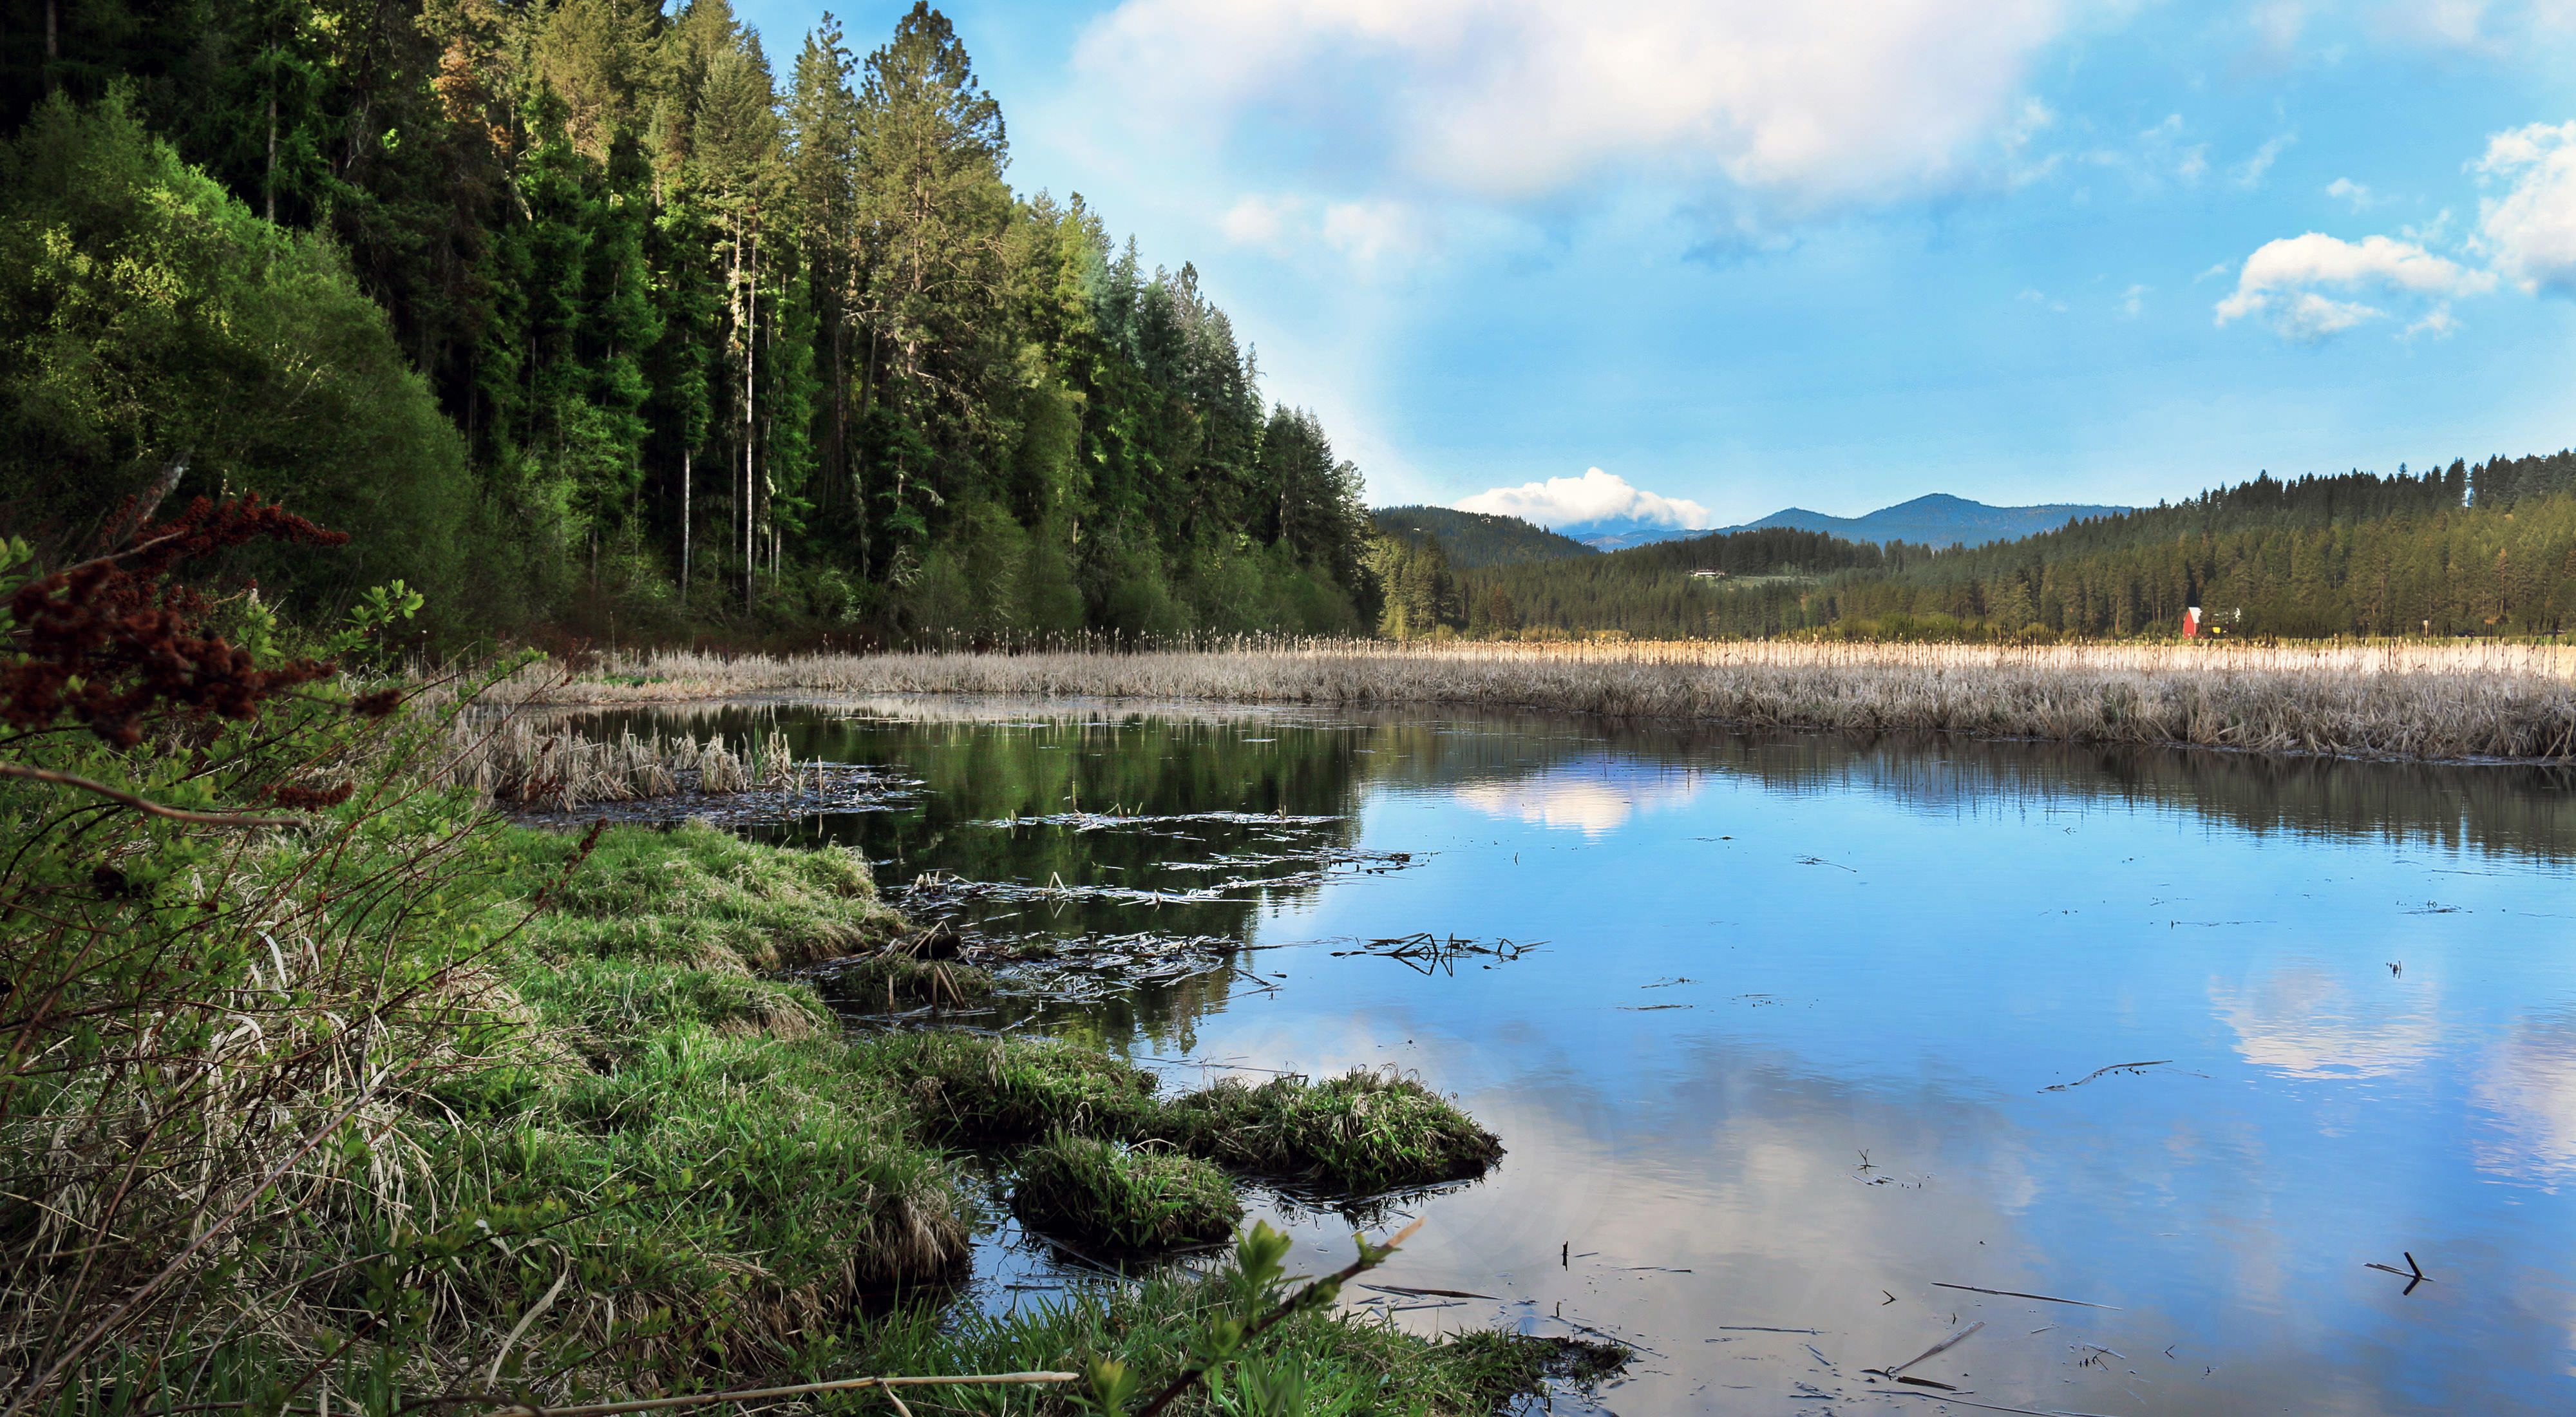 Wetland marsh with conifer trees and mountains in the distance.